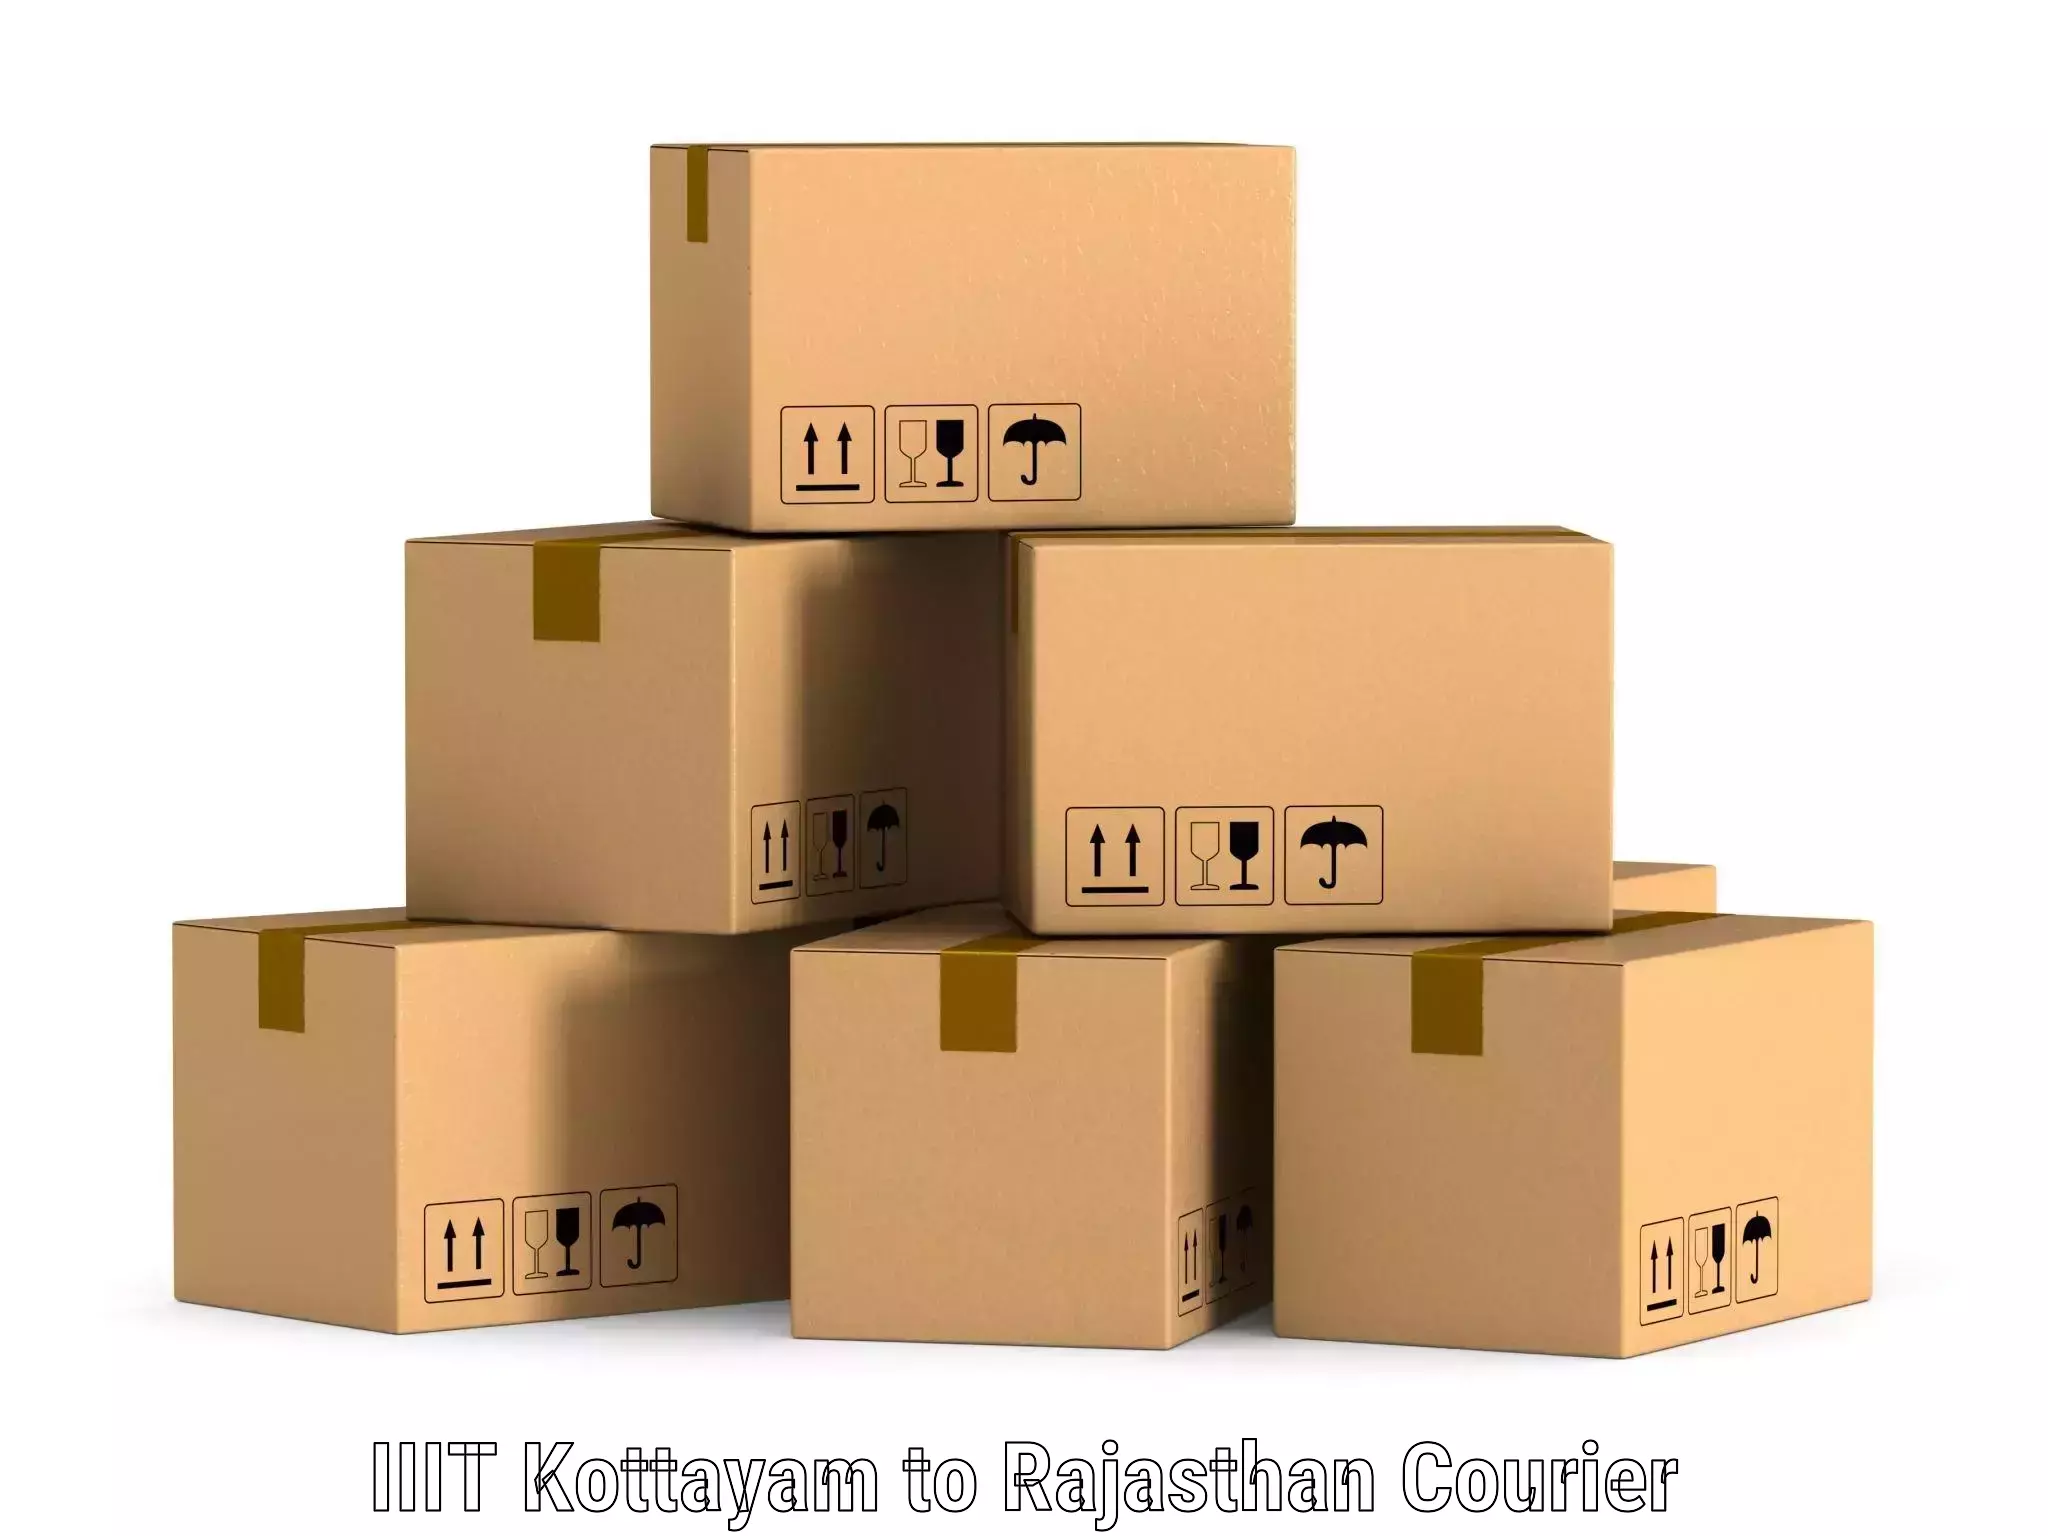 Full-service courier options in IIIT Kottayam to Tonk